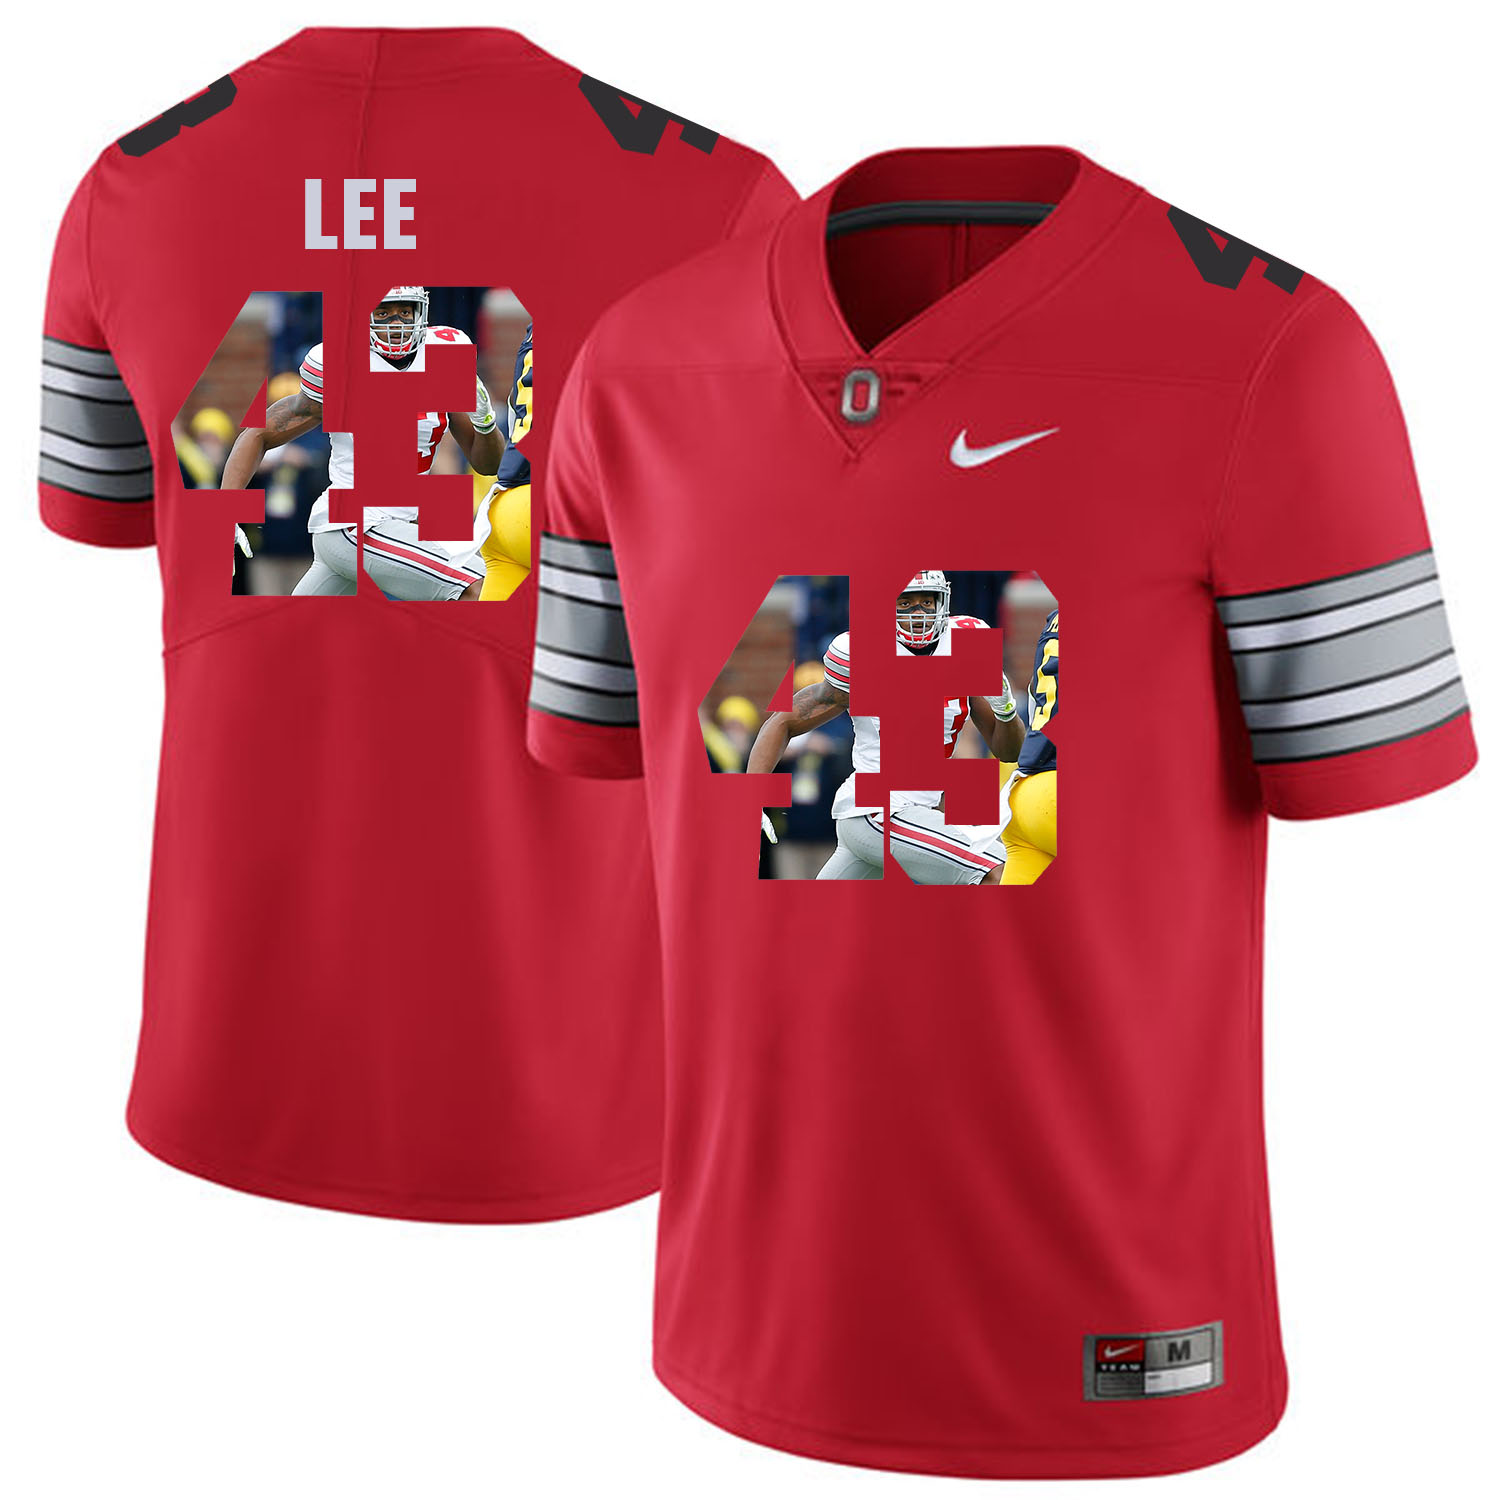 Men Ohio State 43 Lee Red Fashion Edition Customized NCAA Jerseys